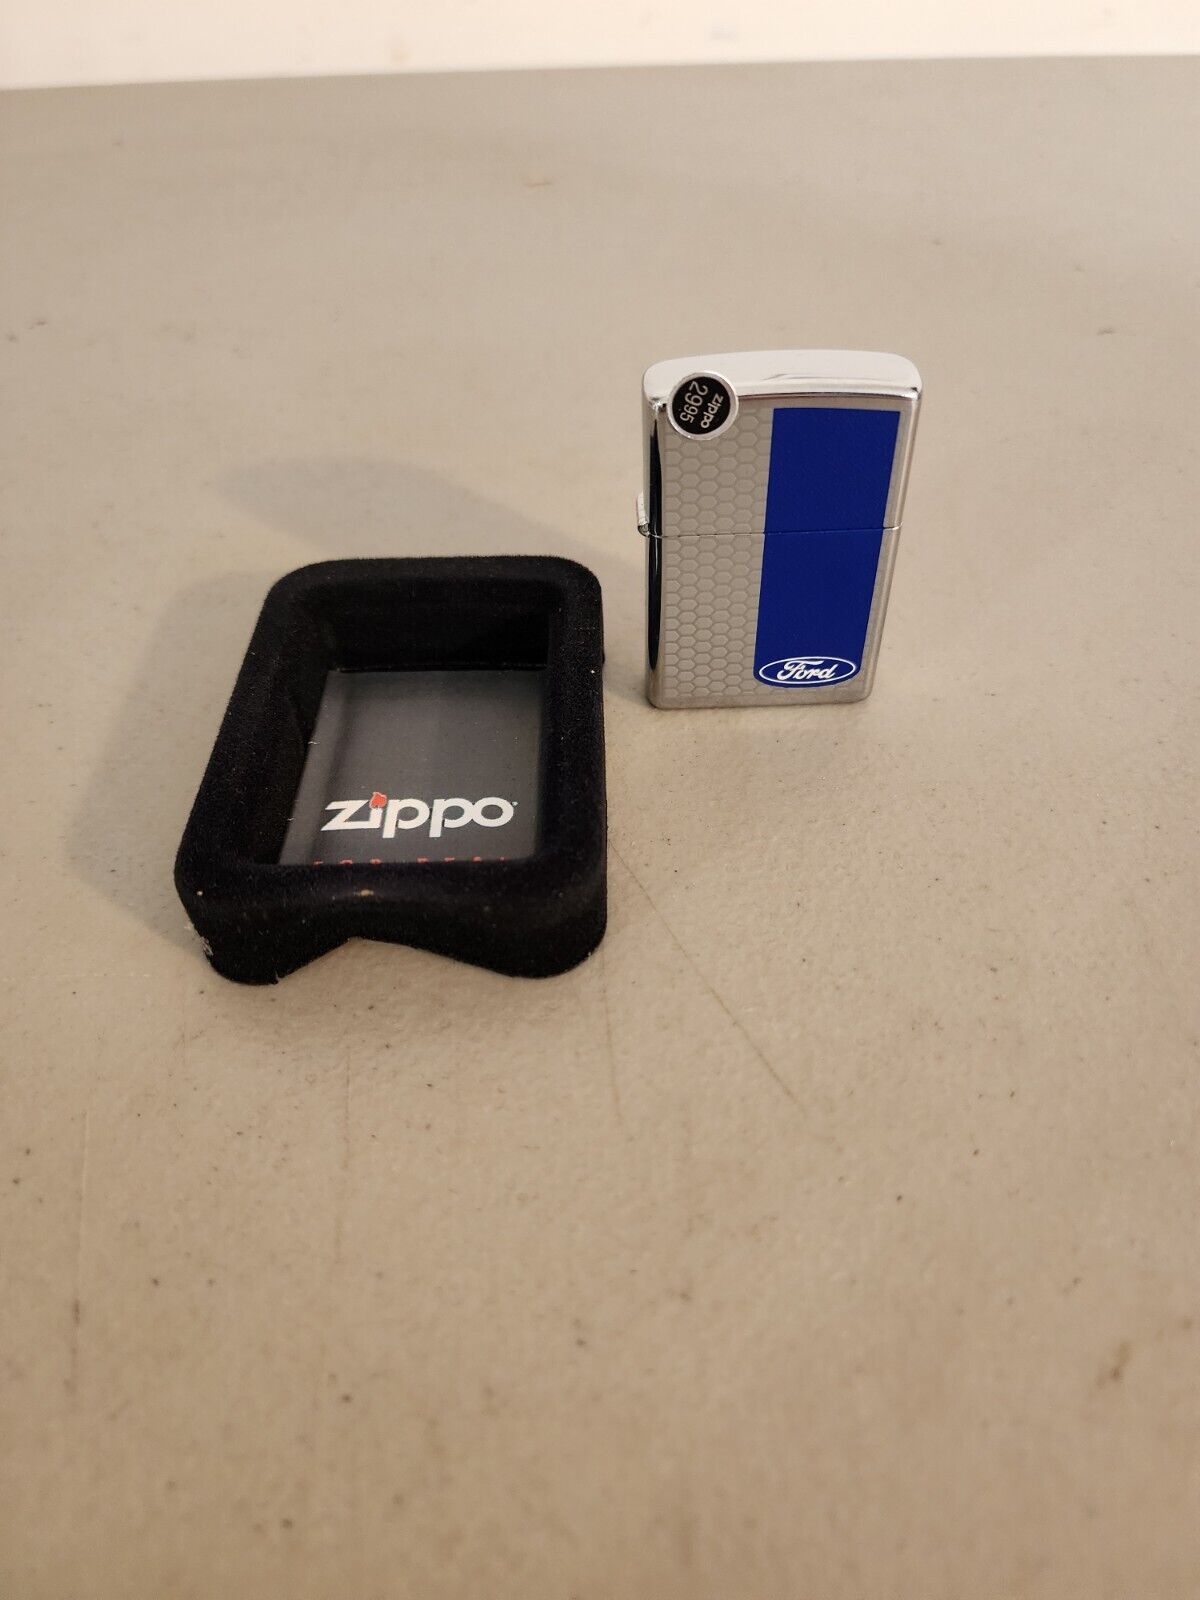 Preowned 2007 Zippo Lighter With Ford On Front